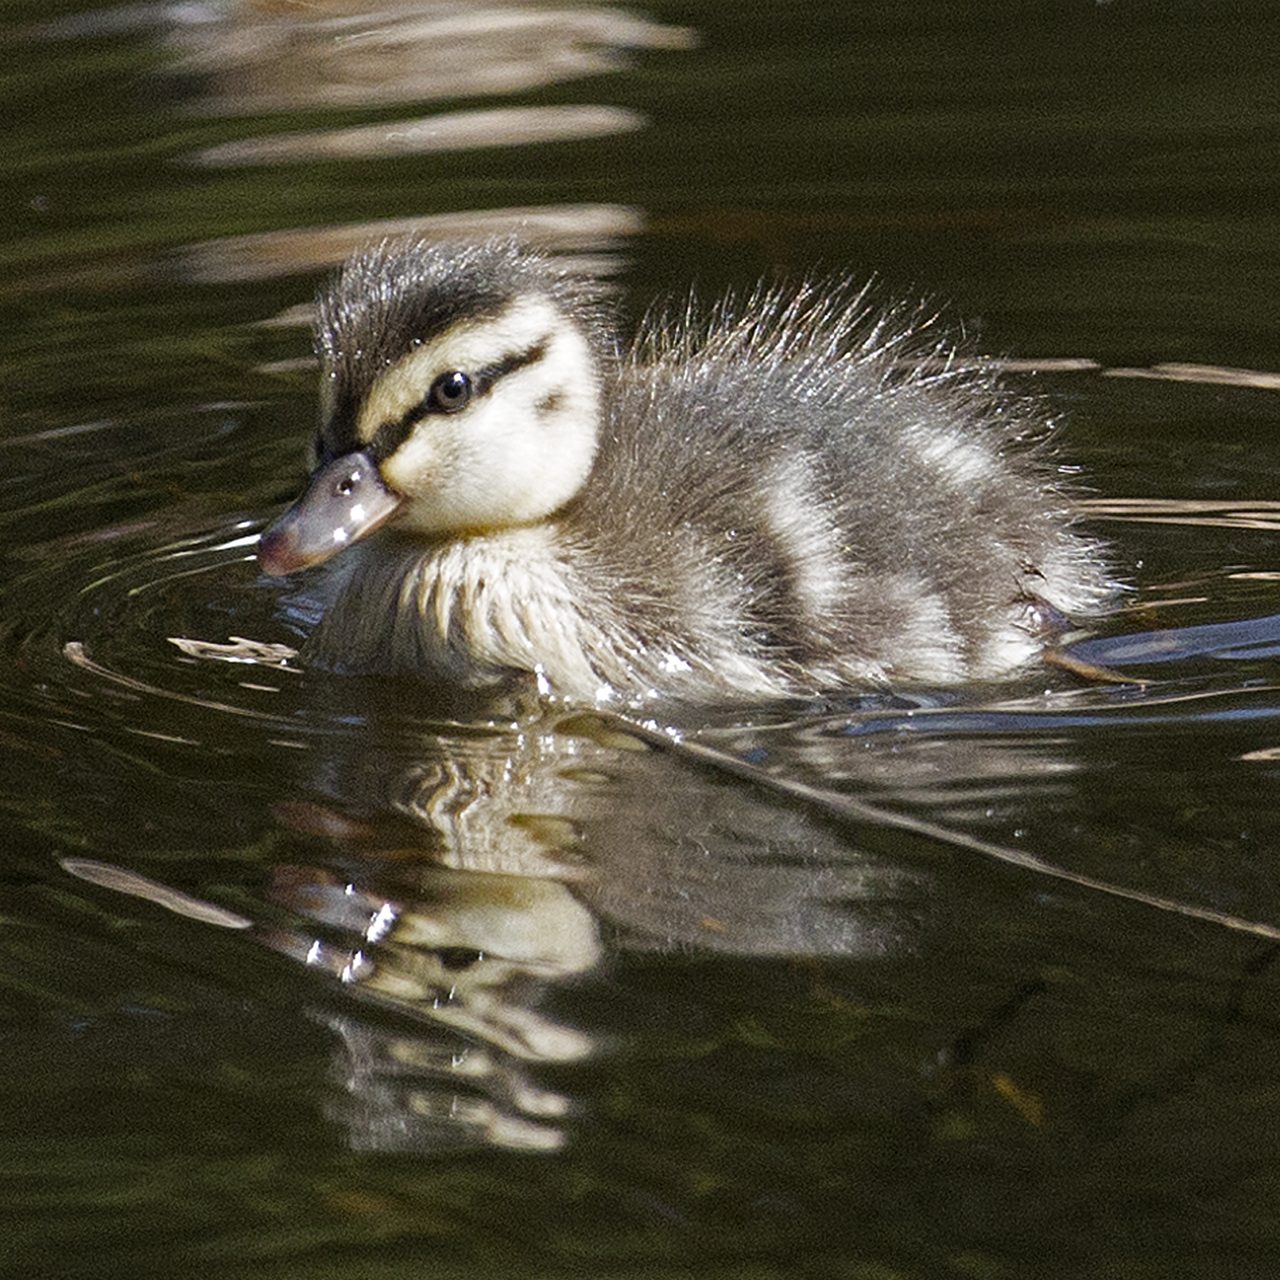 Duckling swimming